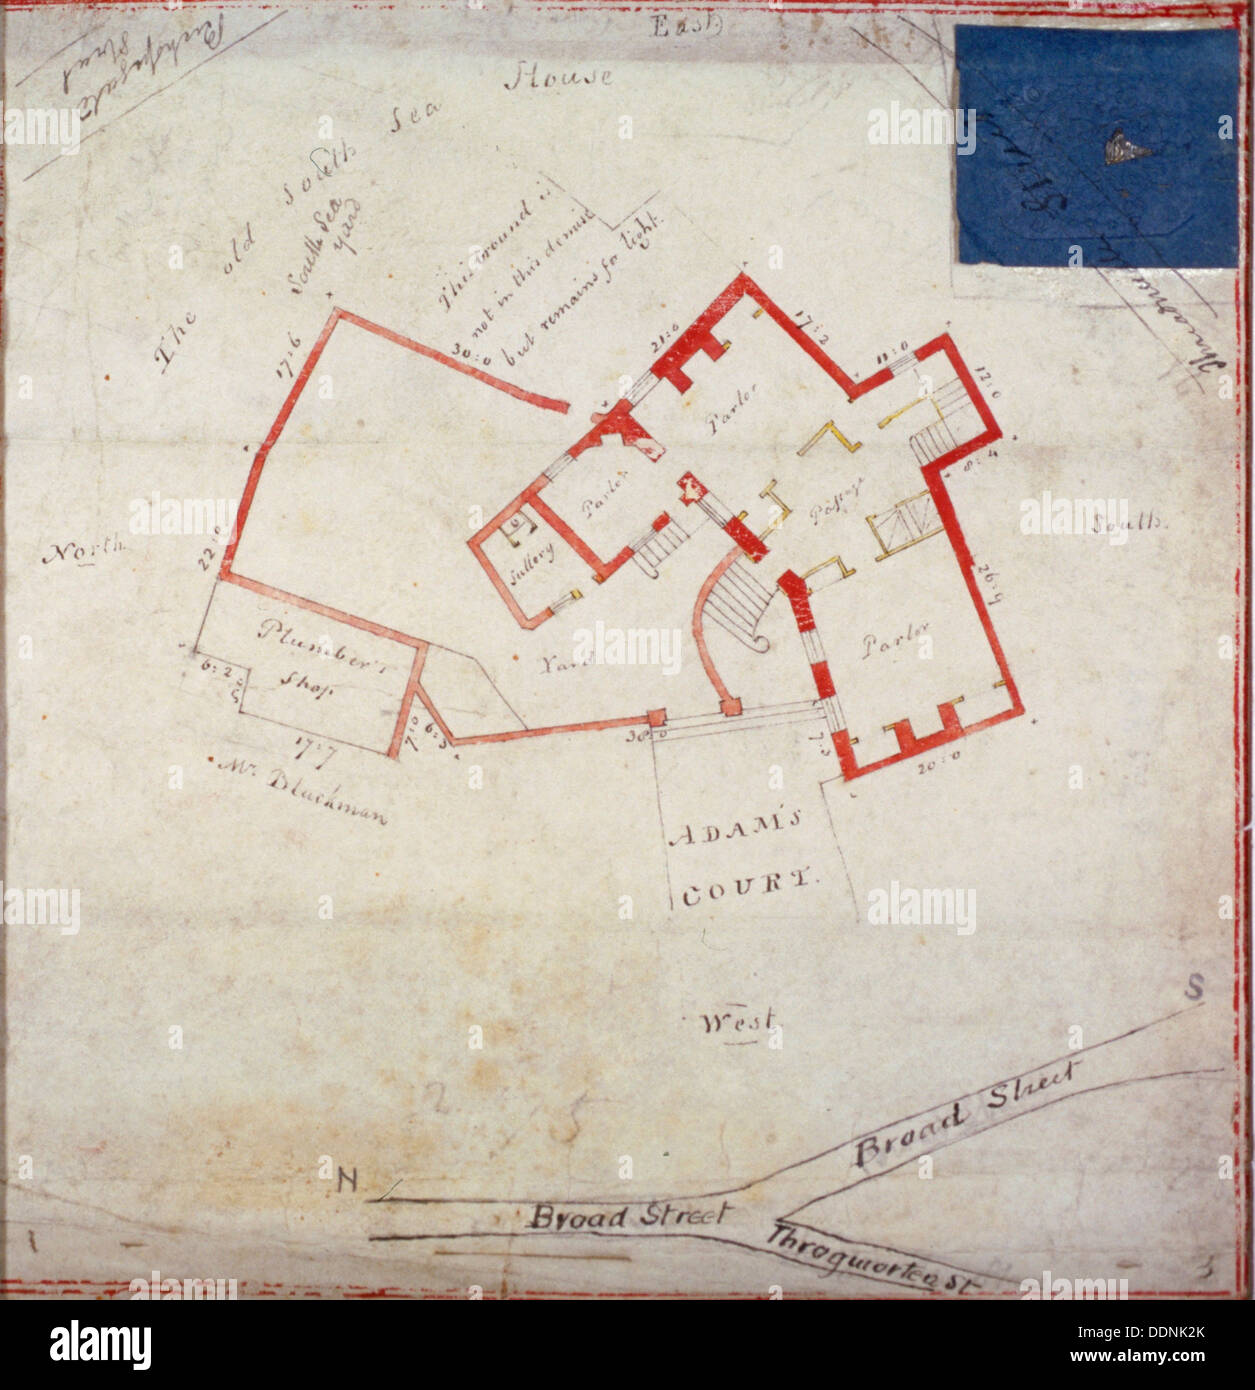 Plan of premises in Adams Court off Old Broad Street, London, c1800.                                 Artist: Anon Stock Photo